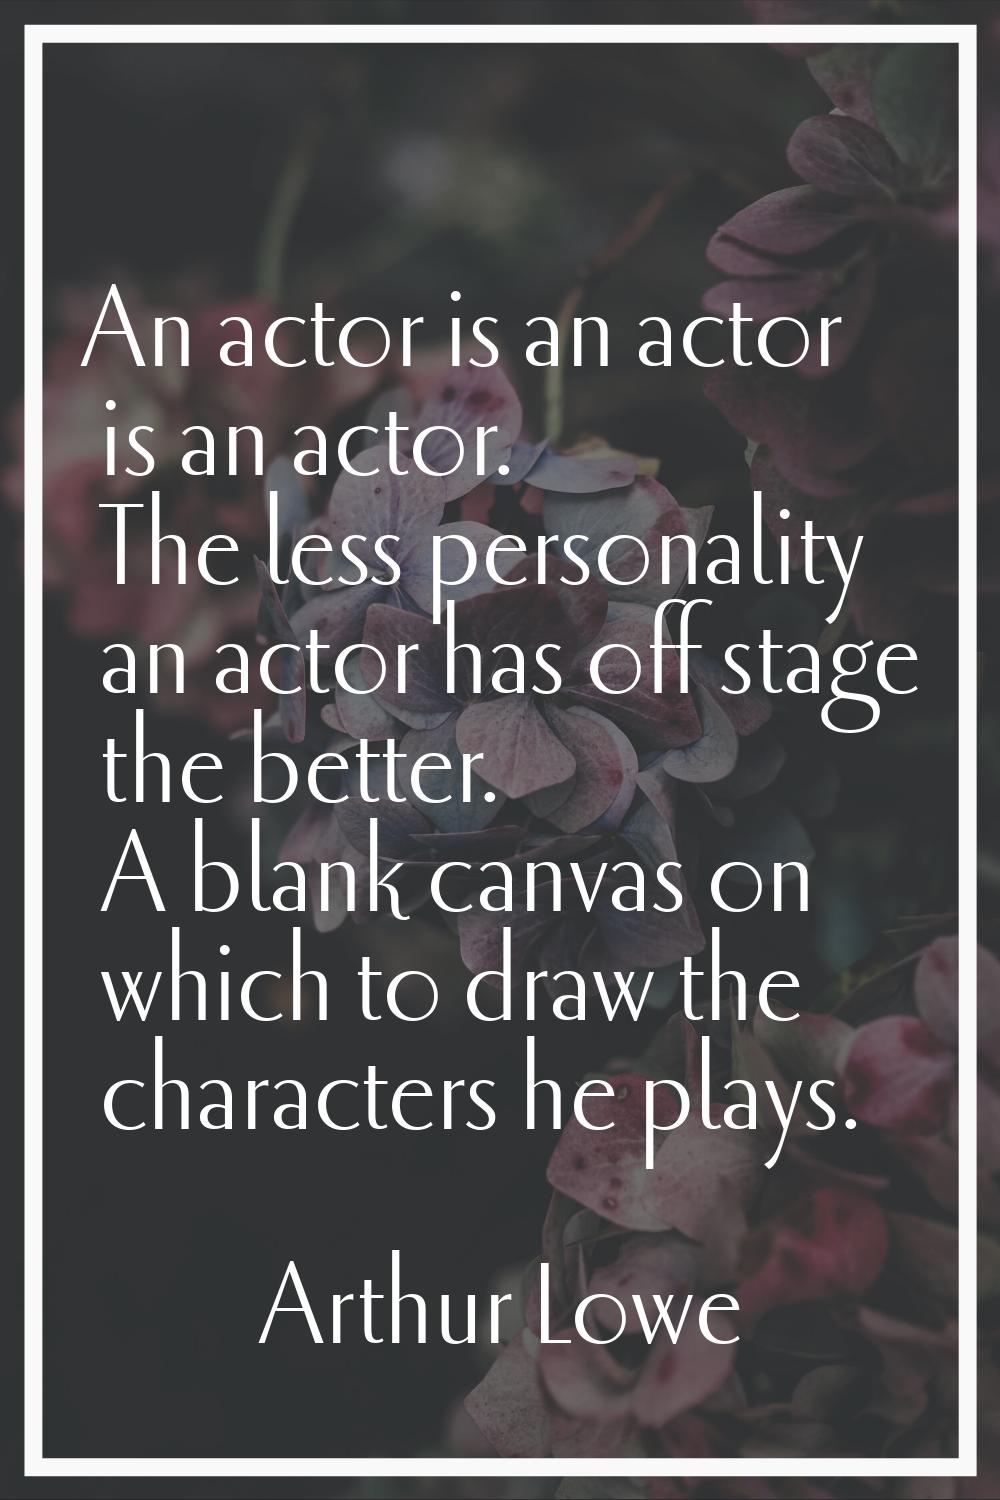 An actor is an actor is an actor. The less personality an actor has off stage the better. A blank c